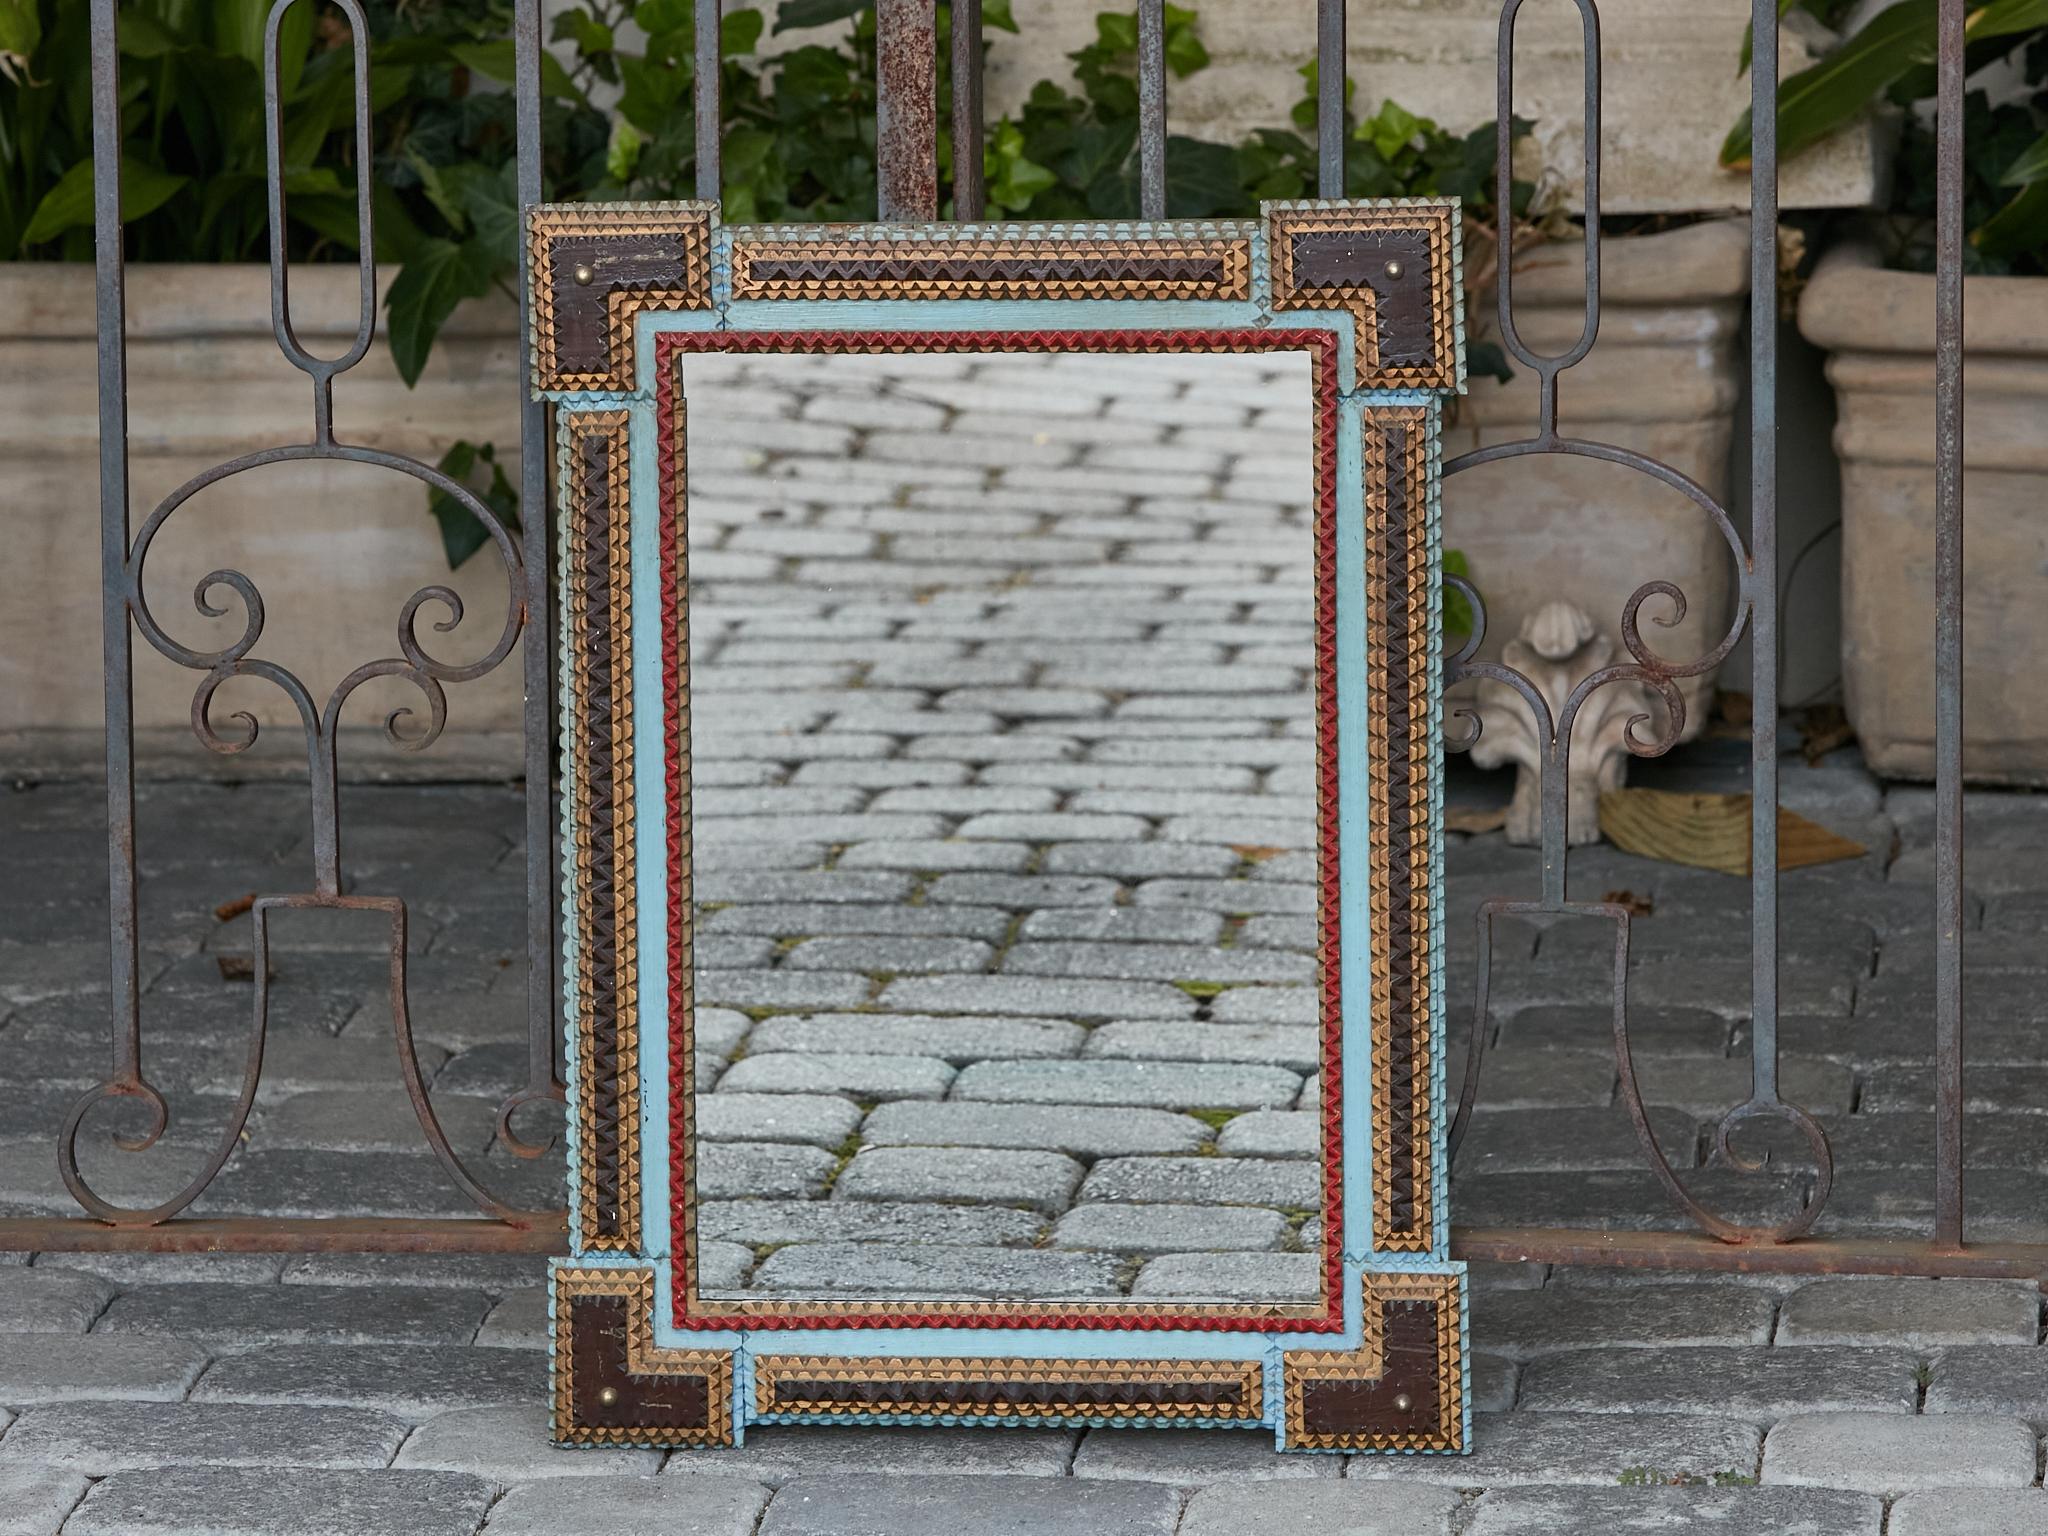 A French Tramp Art Turn of the Century polychrome hand-carved mirror from circa 1900 with protruding corners. This exquisite French Tramp Art mirror, crafted at the Turn of the Century circa 1900, embodies an intricate charm that resonates with